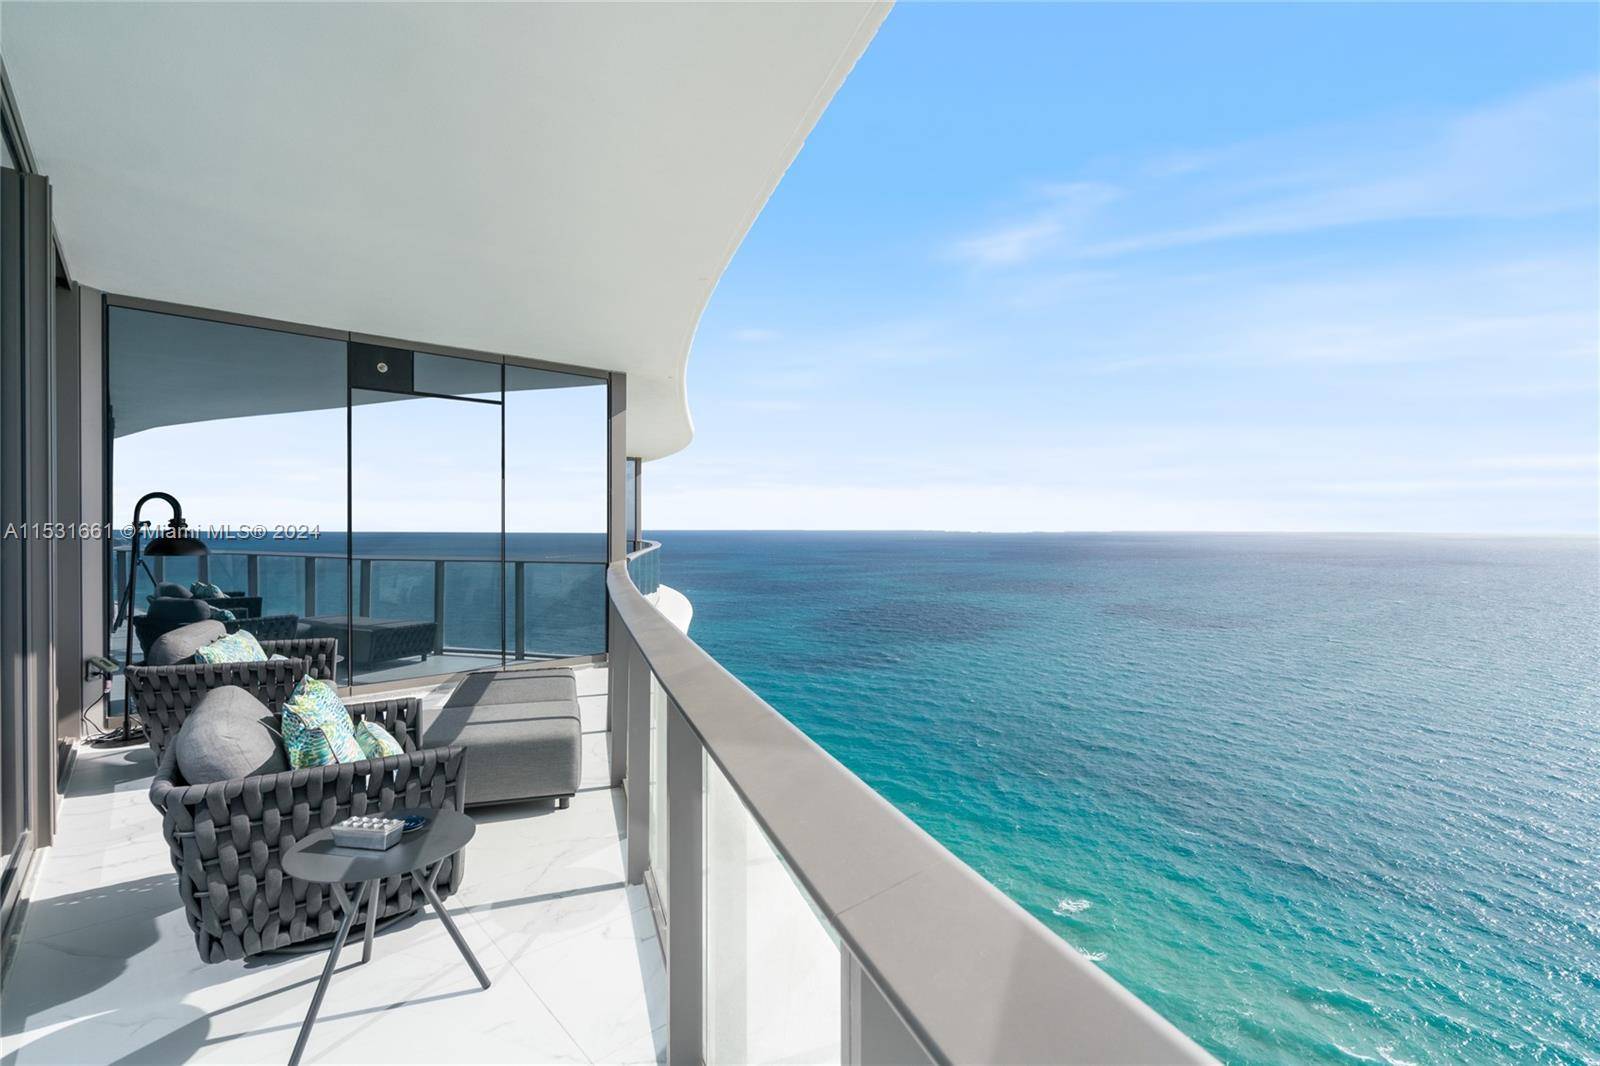 Magnificent luxury residence in the Ritz Carlton in Sunny Isles with breathtaking ocean and city views, spacious 2 bedrooms plus 2.